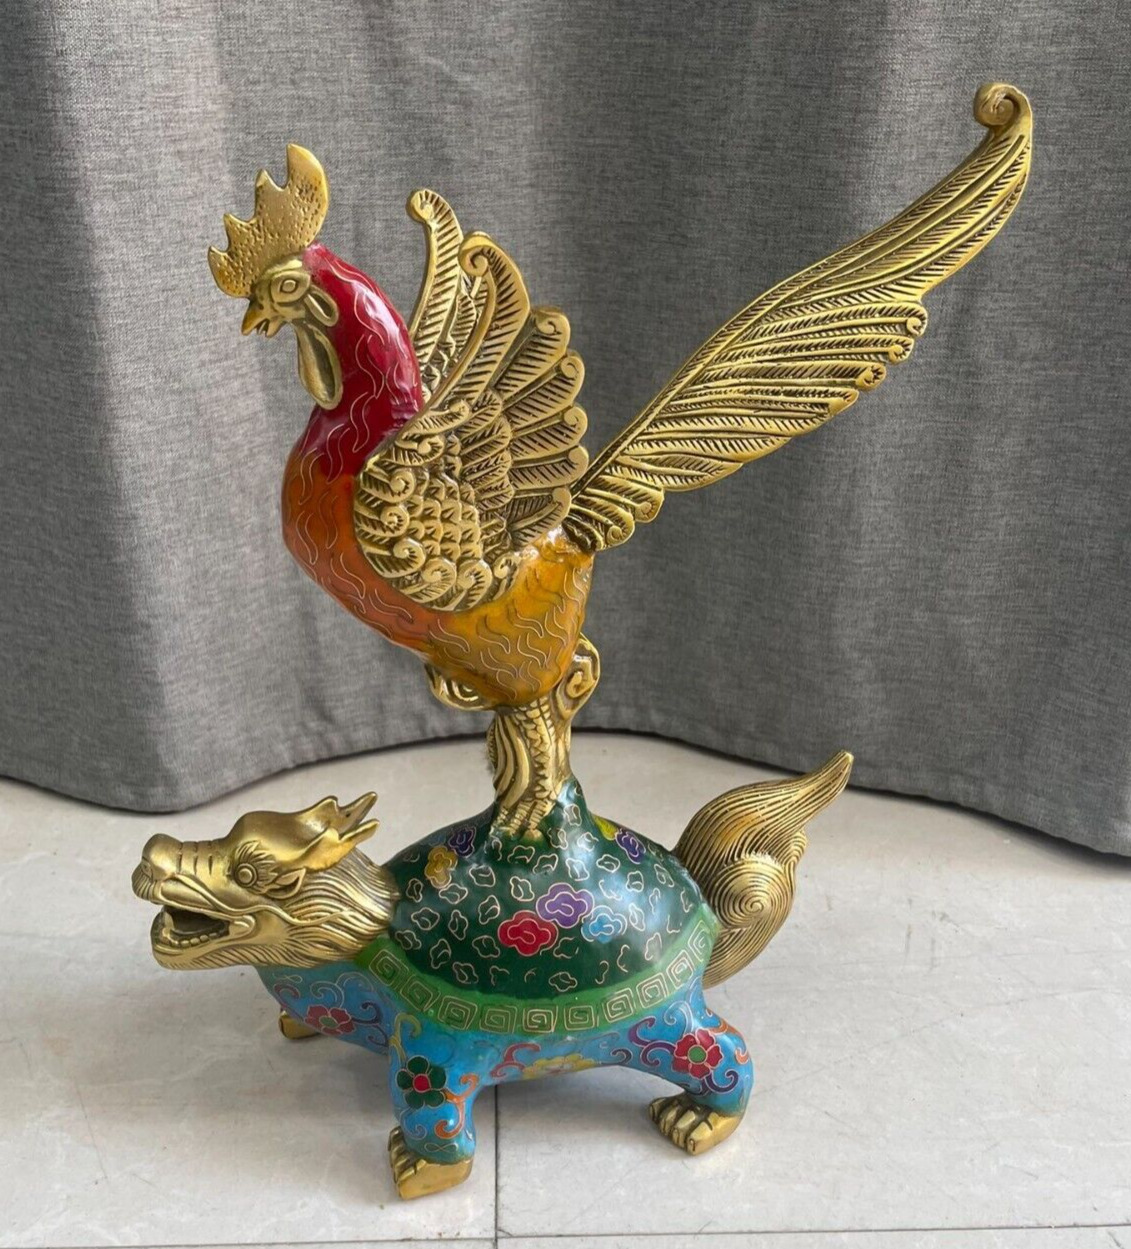 12″ copper Cloisonne enamel rooster stands on dragon turtle big statue champion